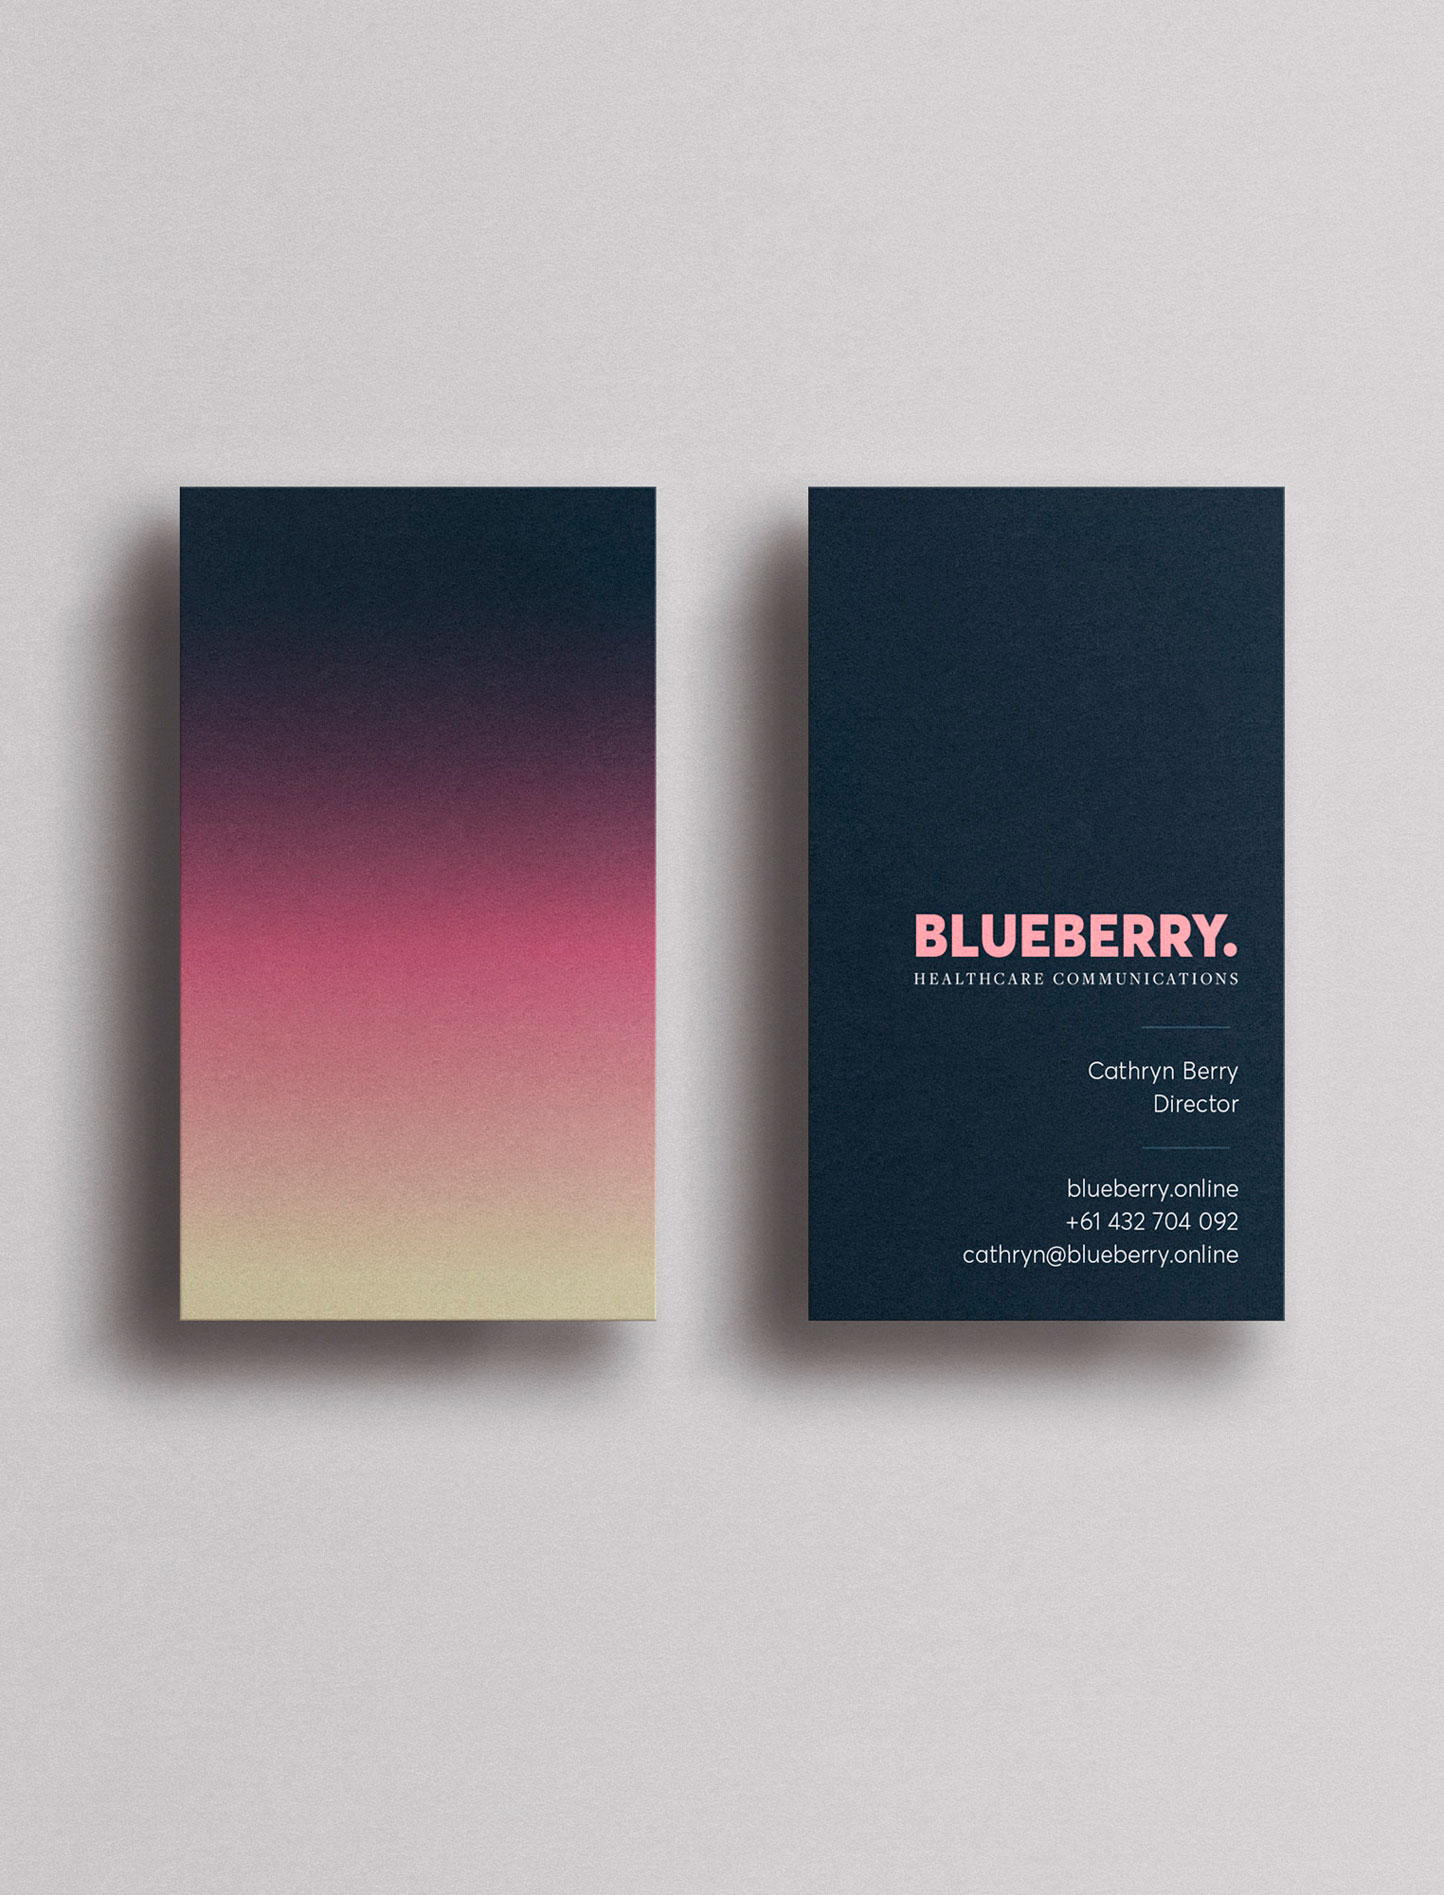 Blueberry Healthcare Communications